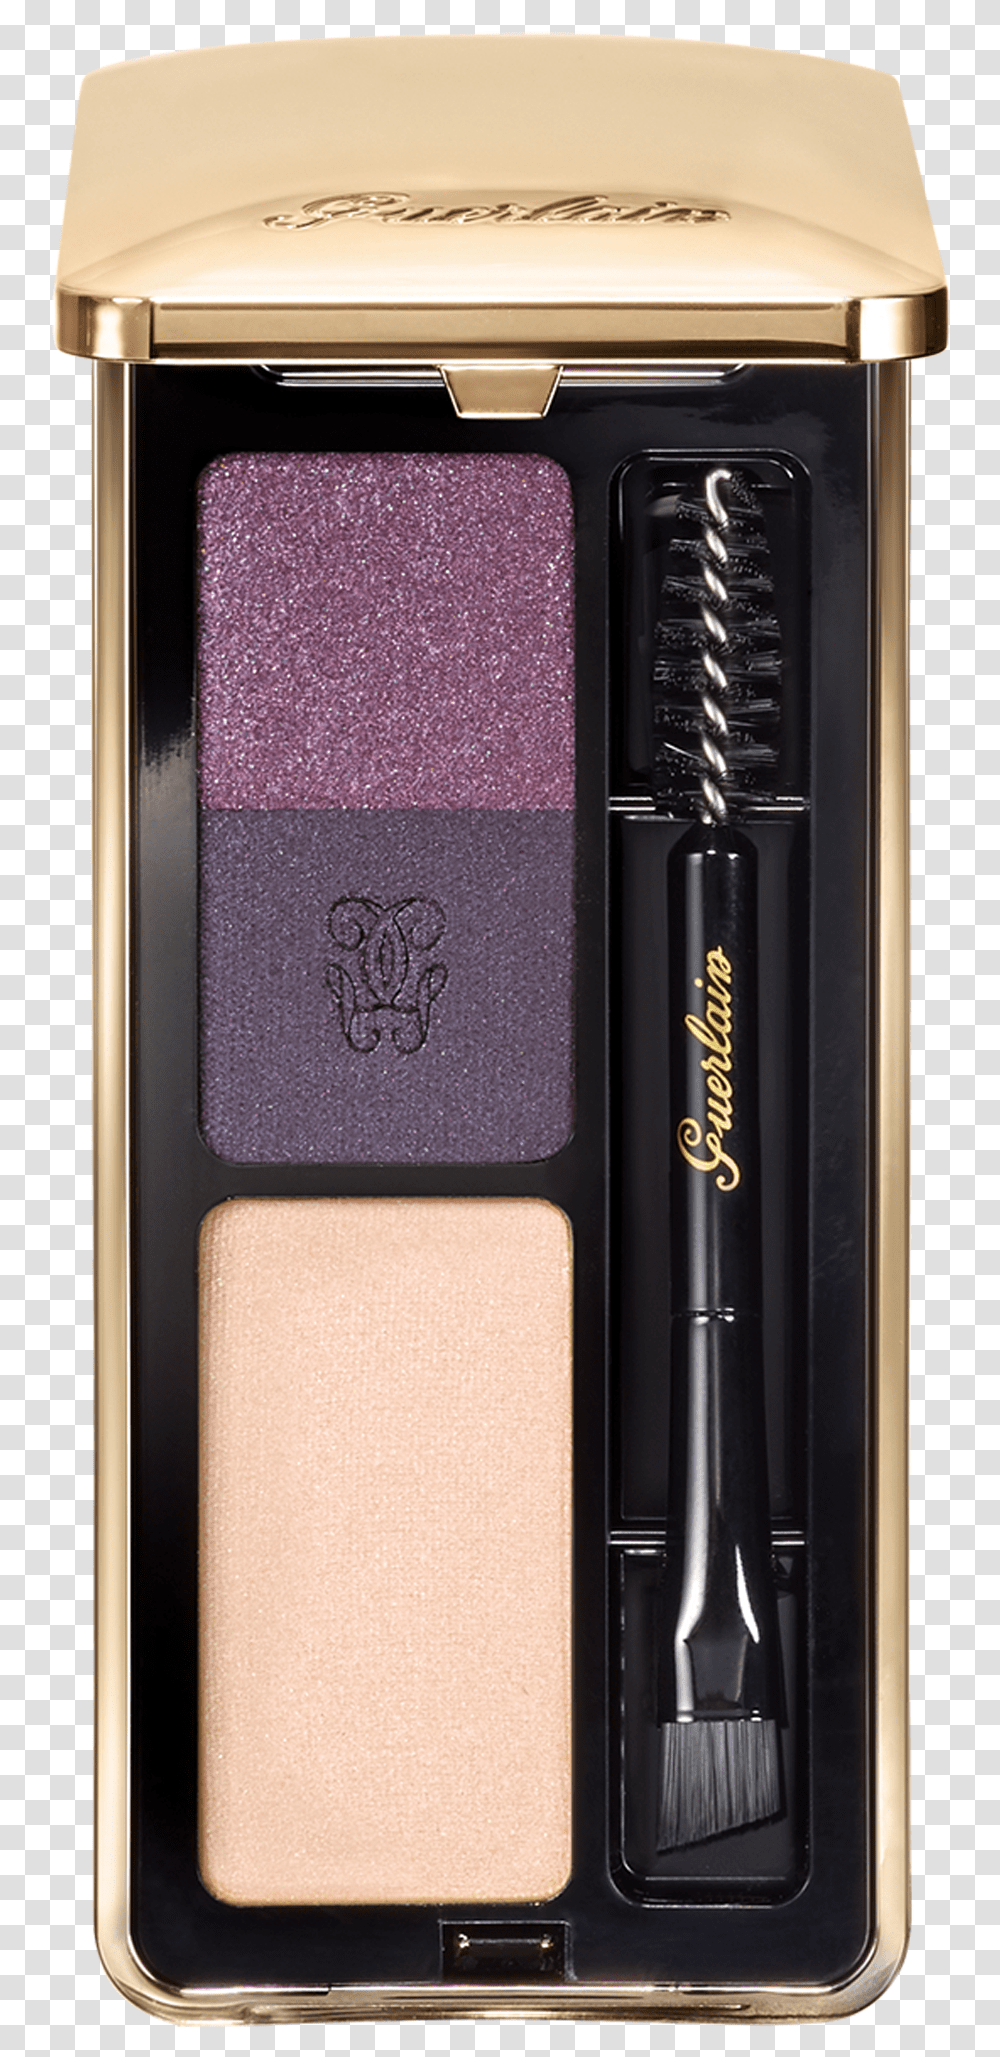 Guerlain Eyeshadow Palette 2019, Mobile Phone, Electronics, Cell Phone, Cosmetics Transparent Png